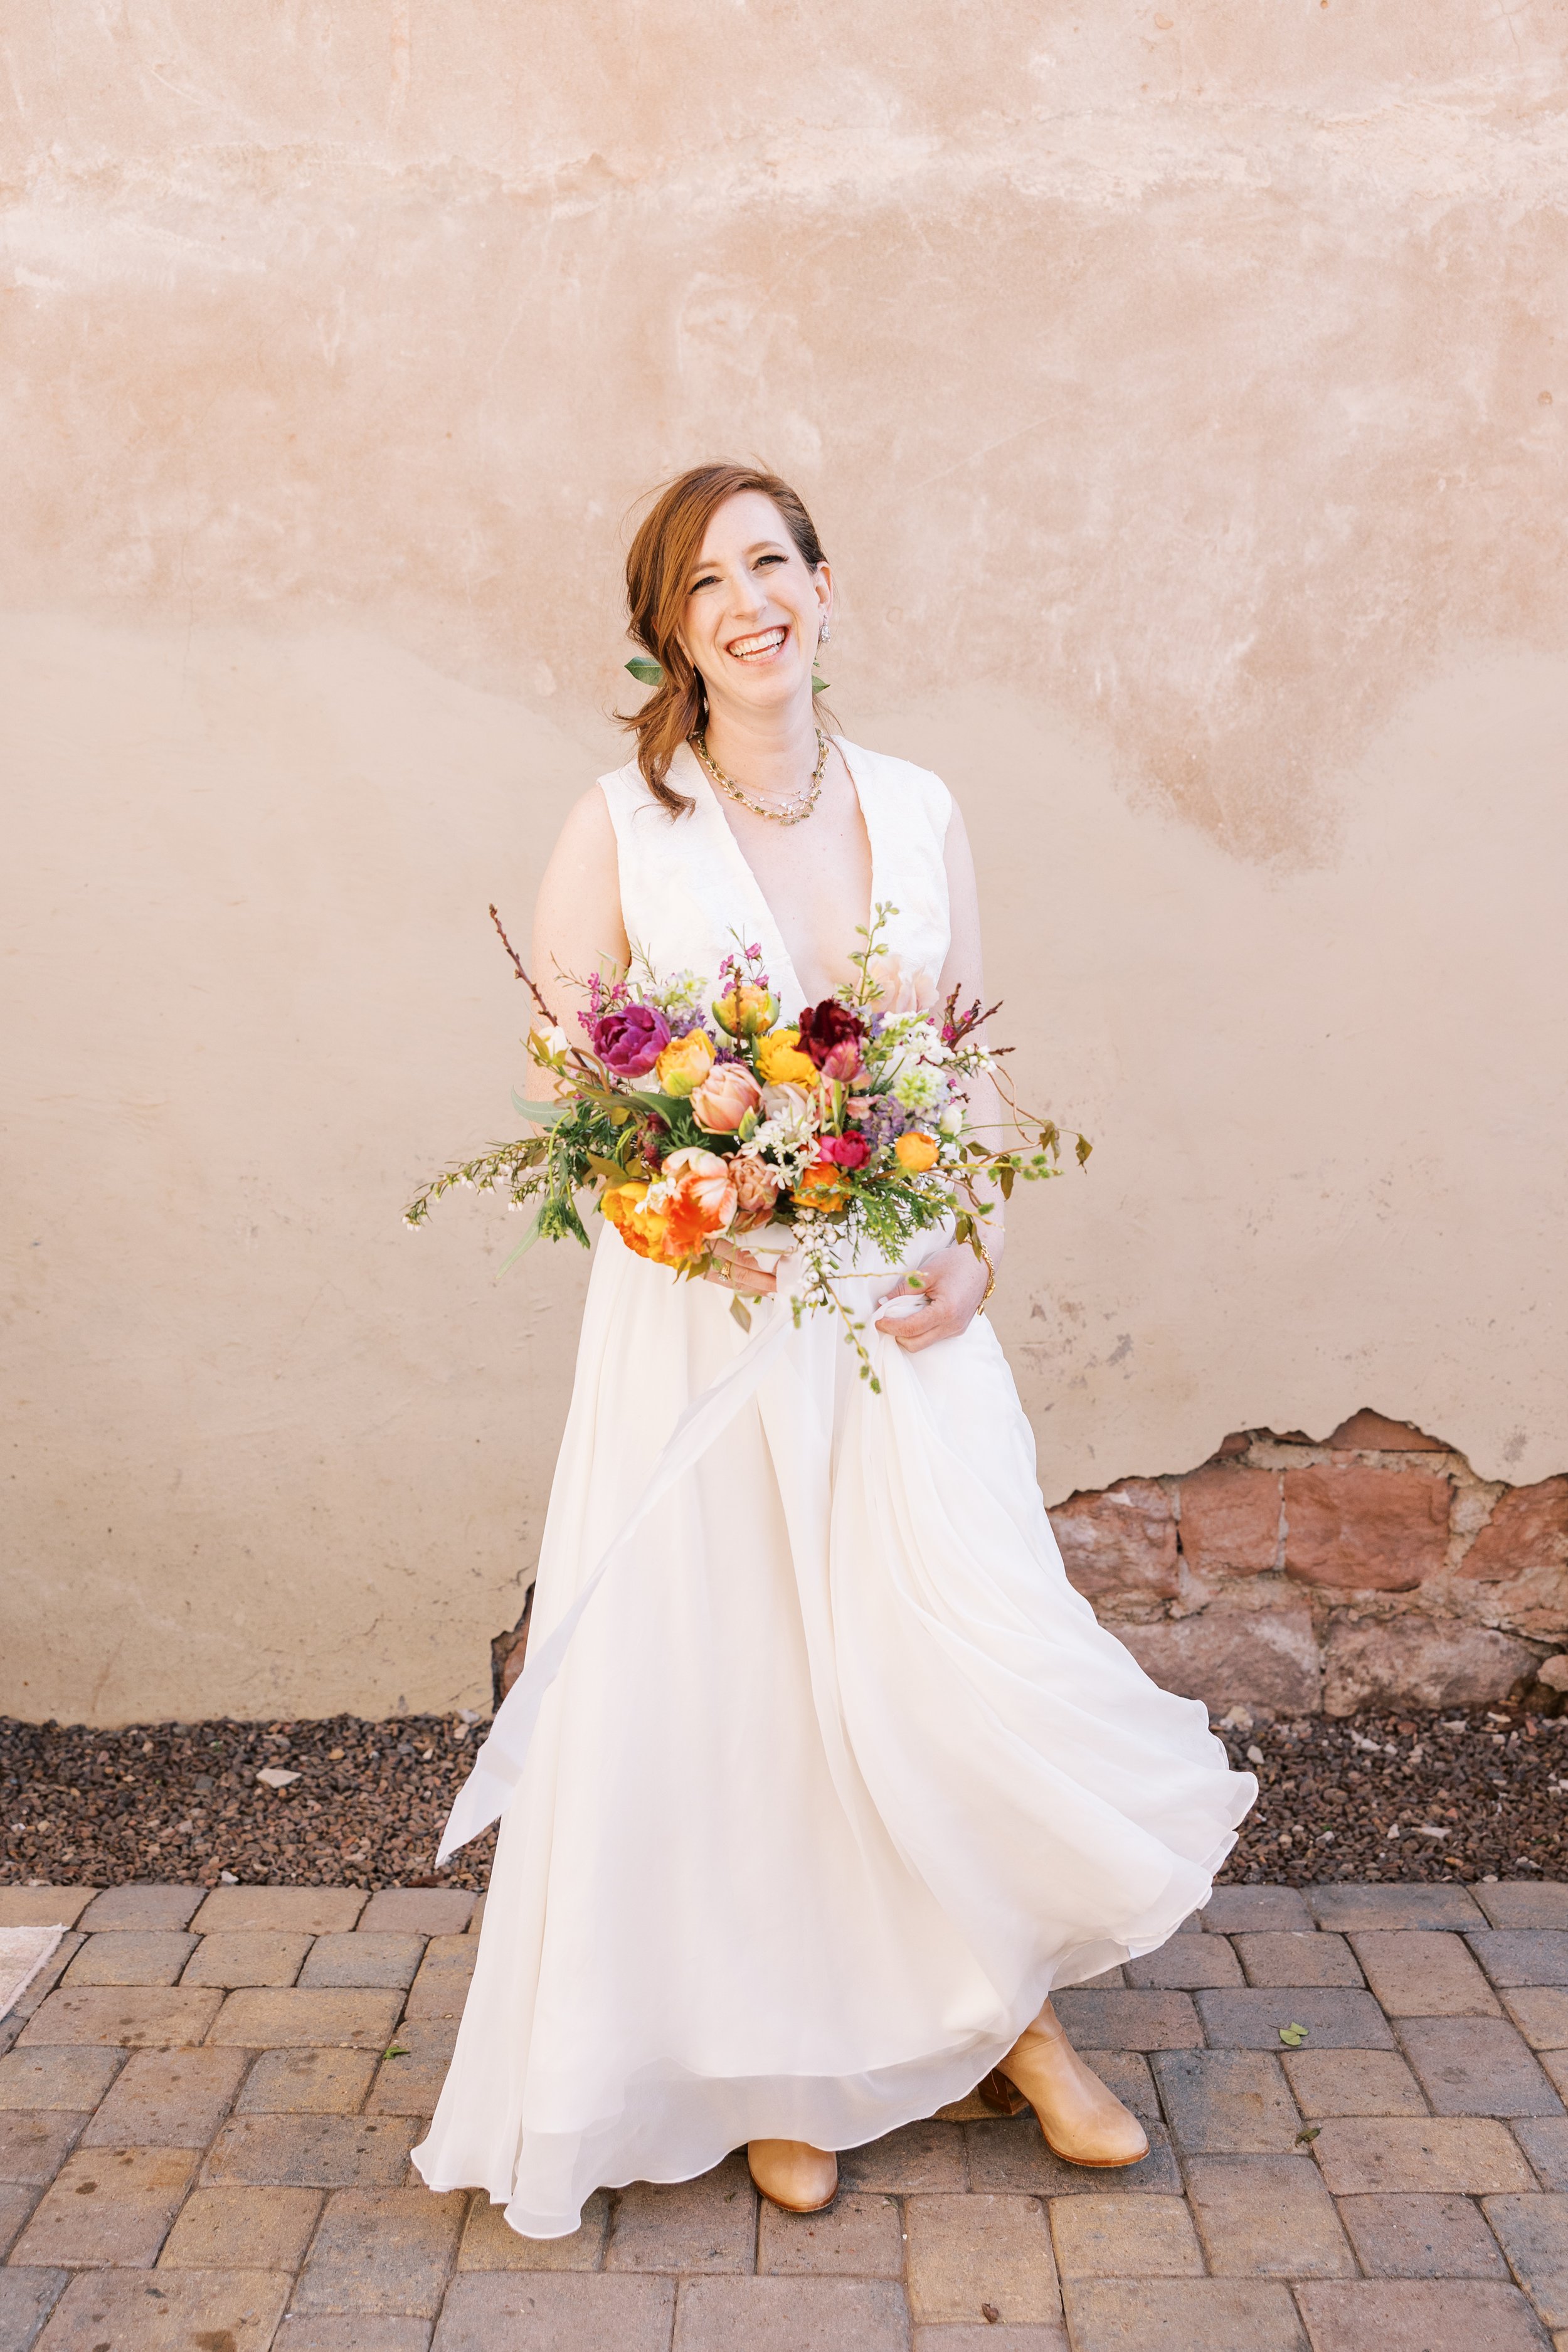 The bride and bouquet.jpg